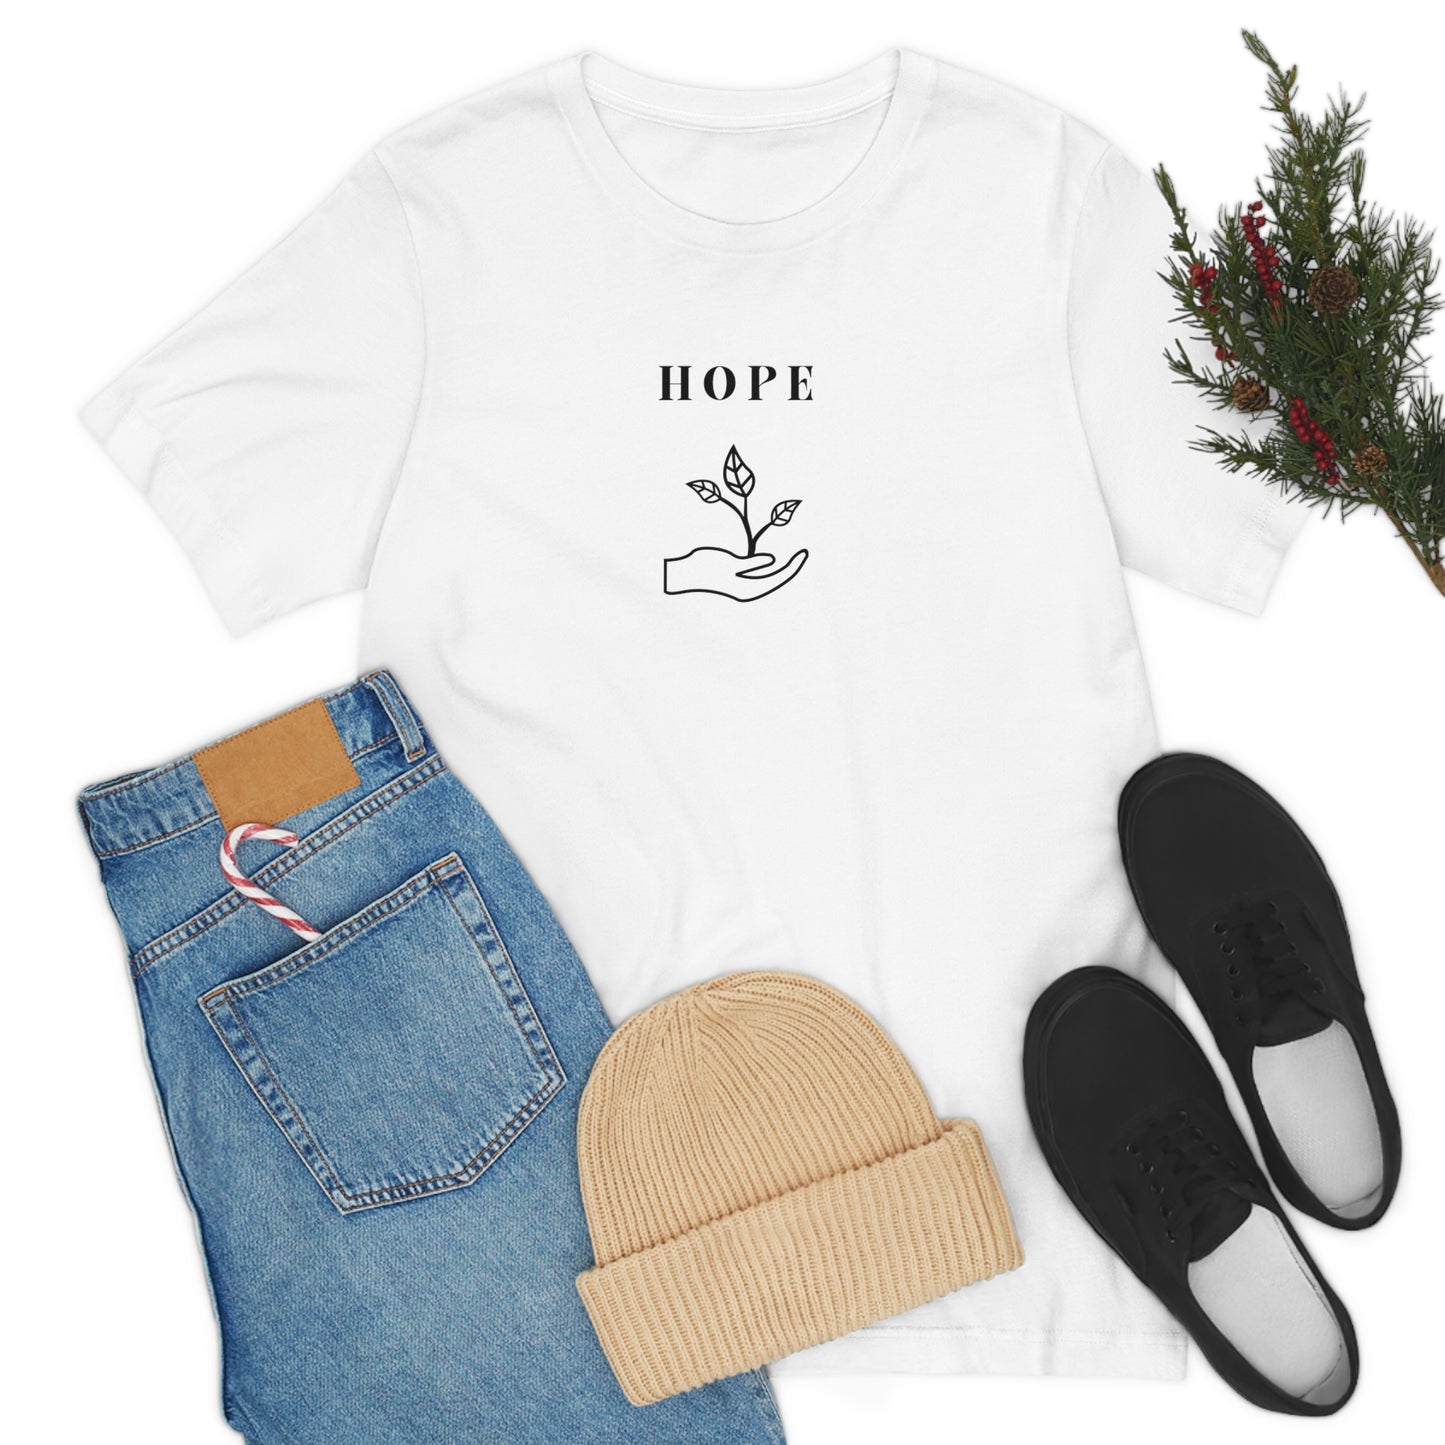 Hope inspirational word tee shirts, tshirts that encourage t shirts for friends gift t shirt gifts for loved ones